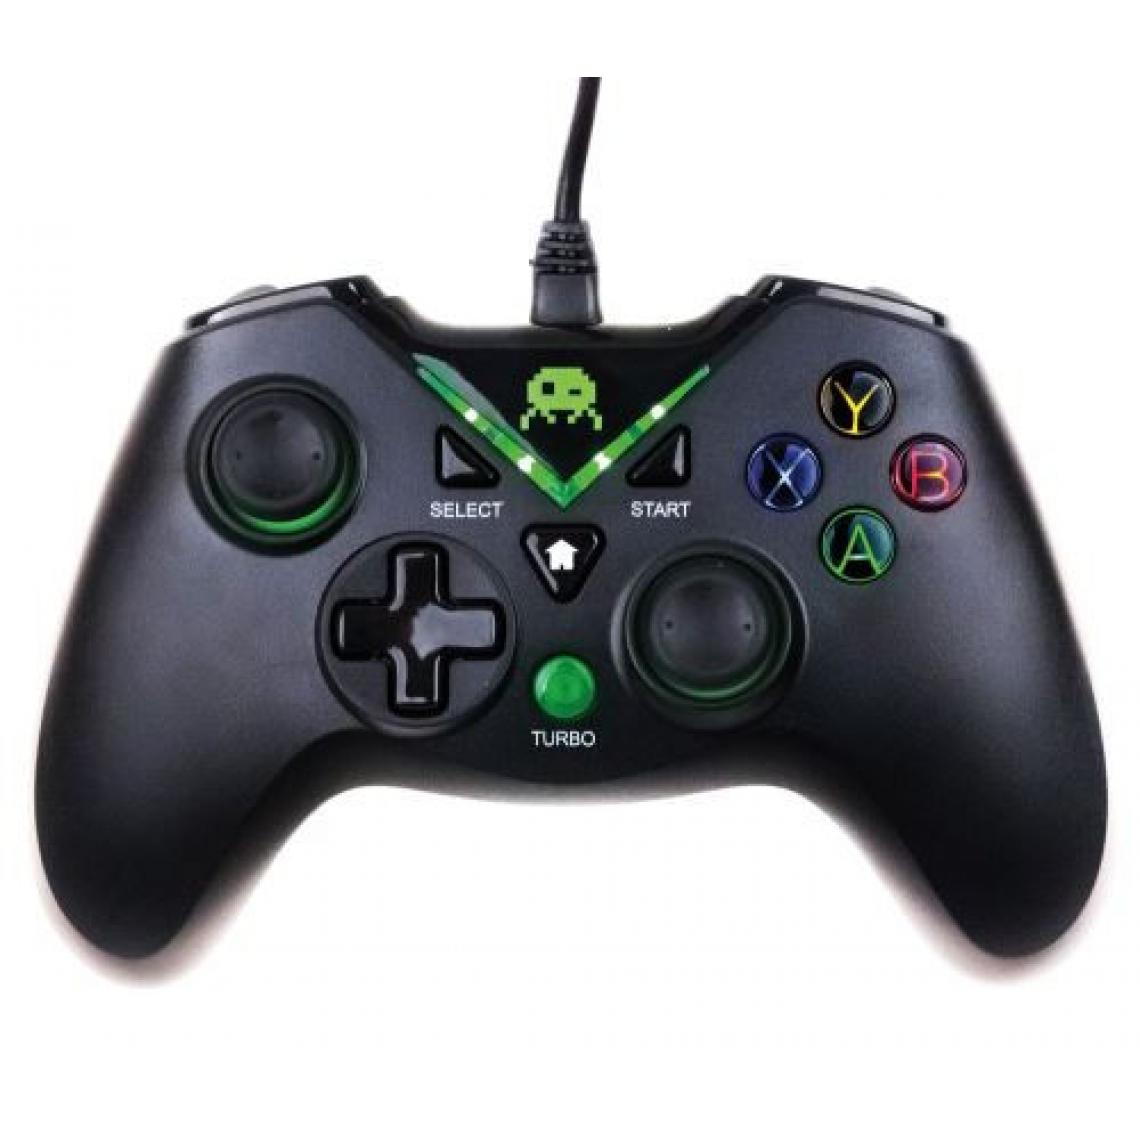 Freaks And Geeks - Manette Xbox One filaire Freaks And Geeks Noir - Joystick